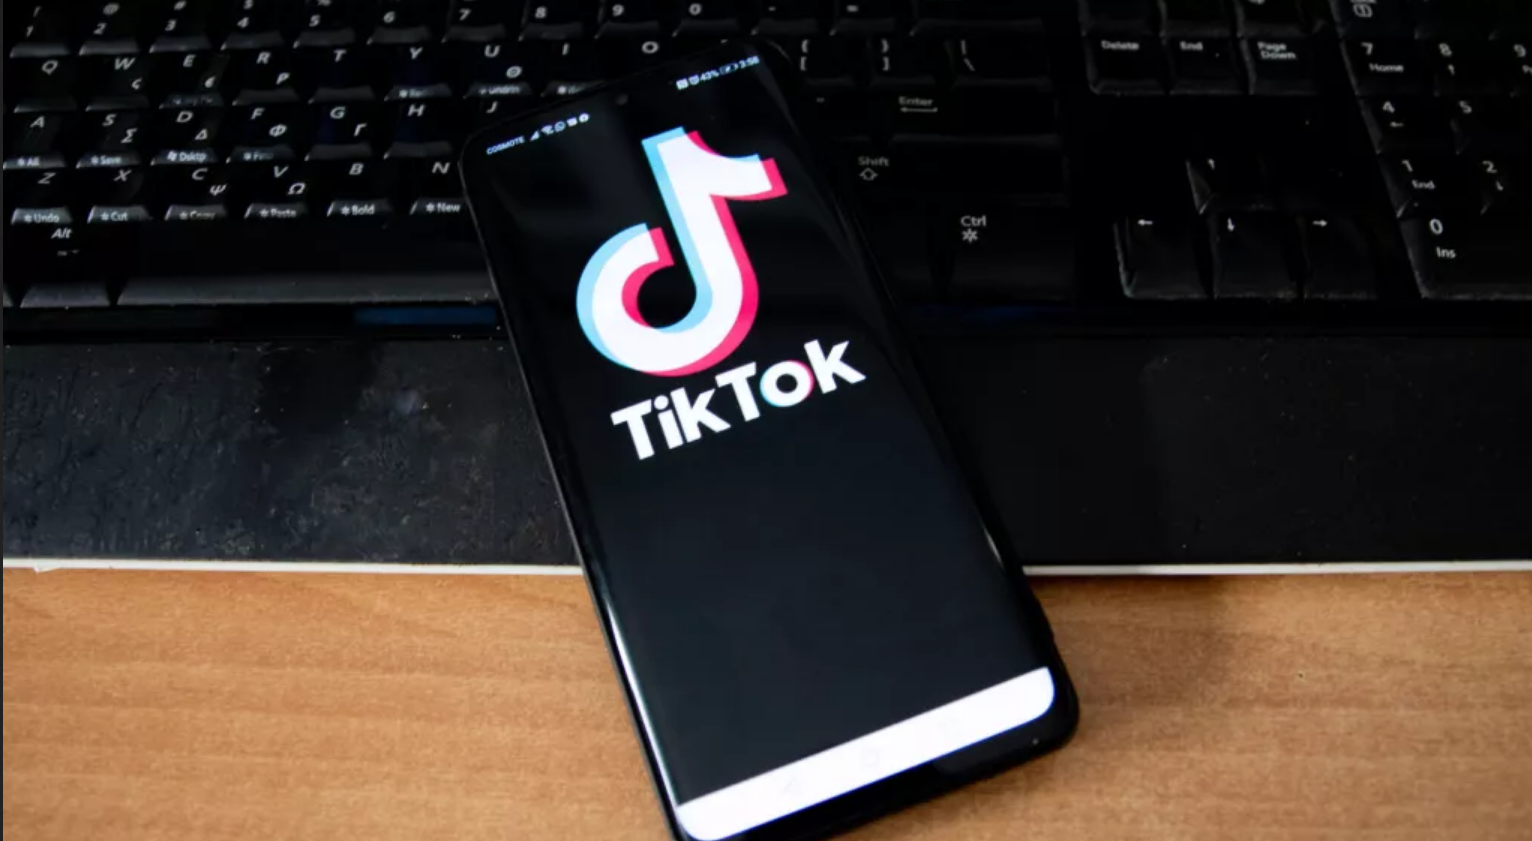 How can a VPN get around the TikTok ban 2021?